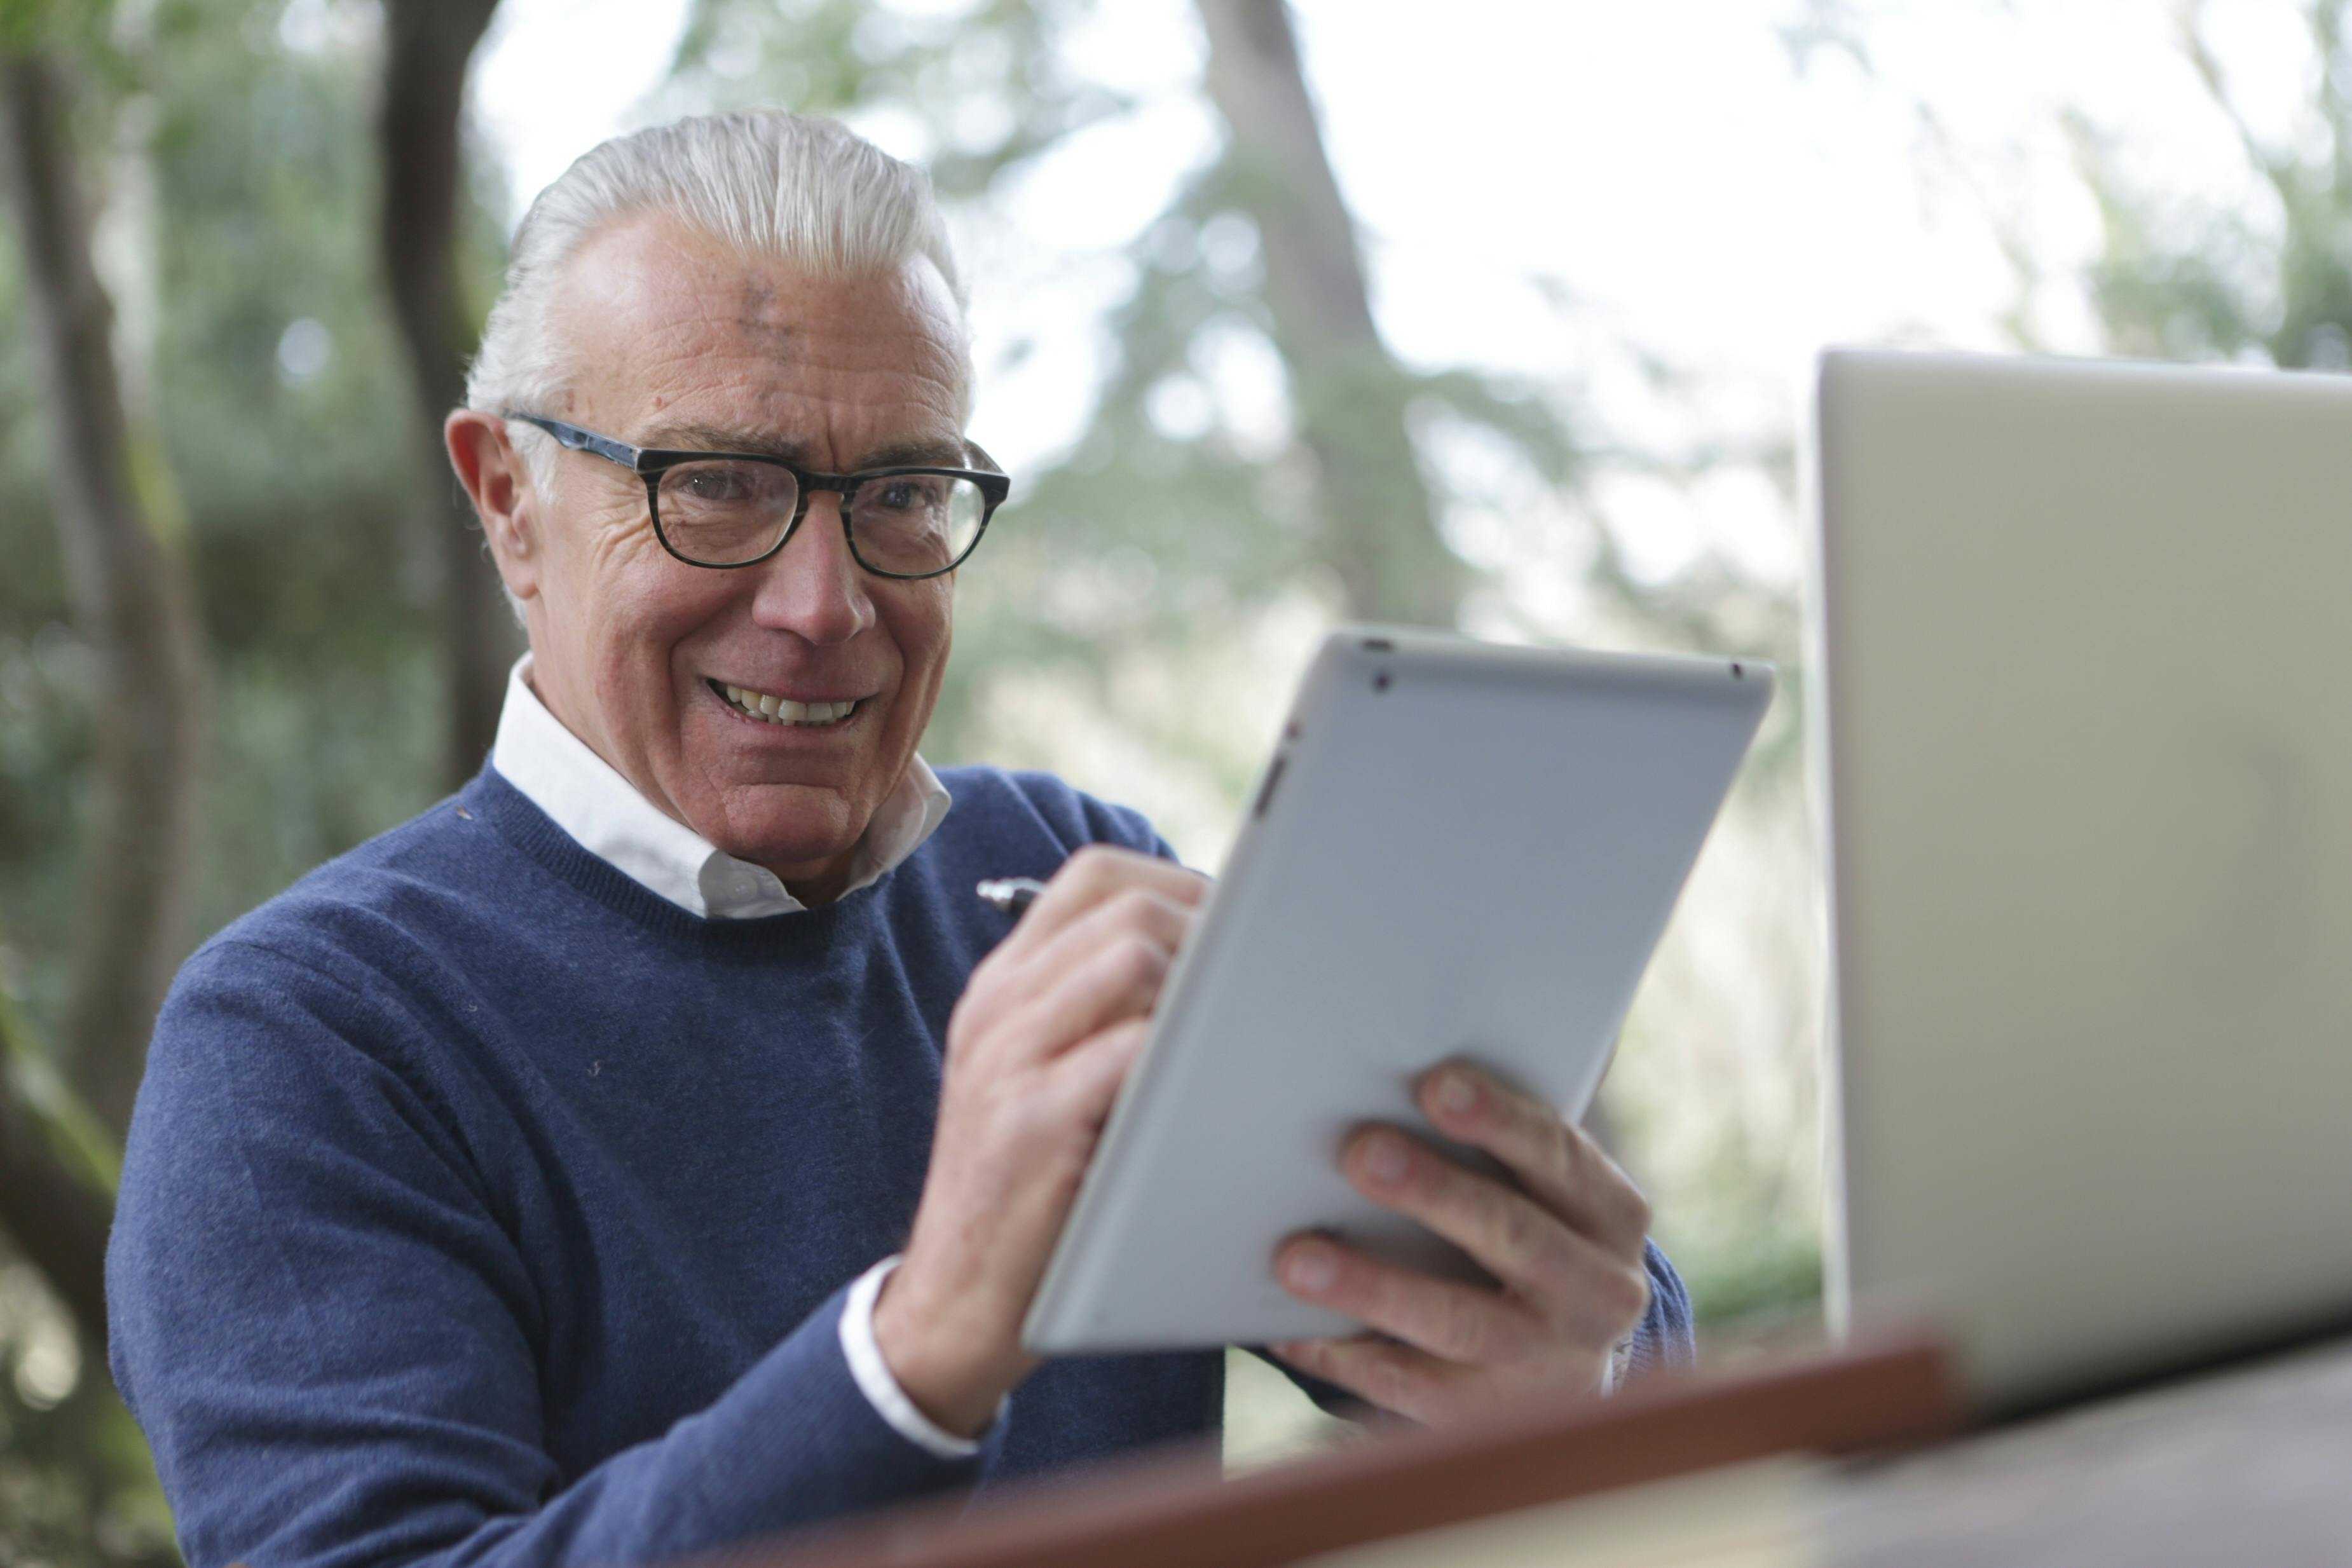 Elderly man with a tablet | Source: Pexels